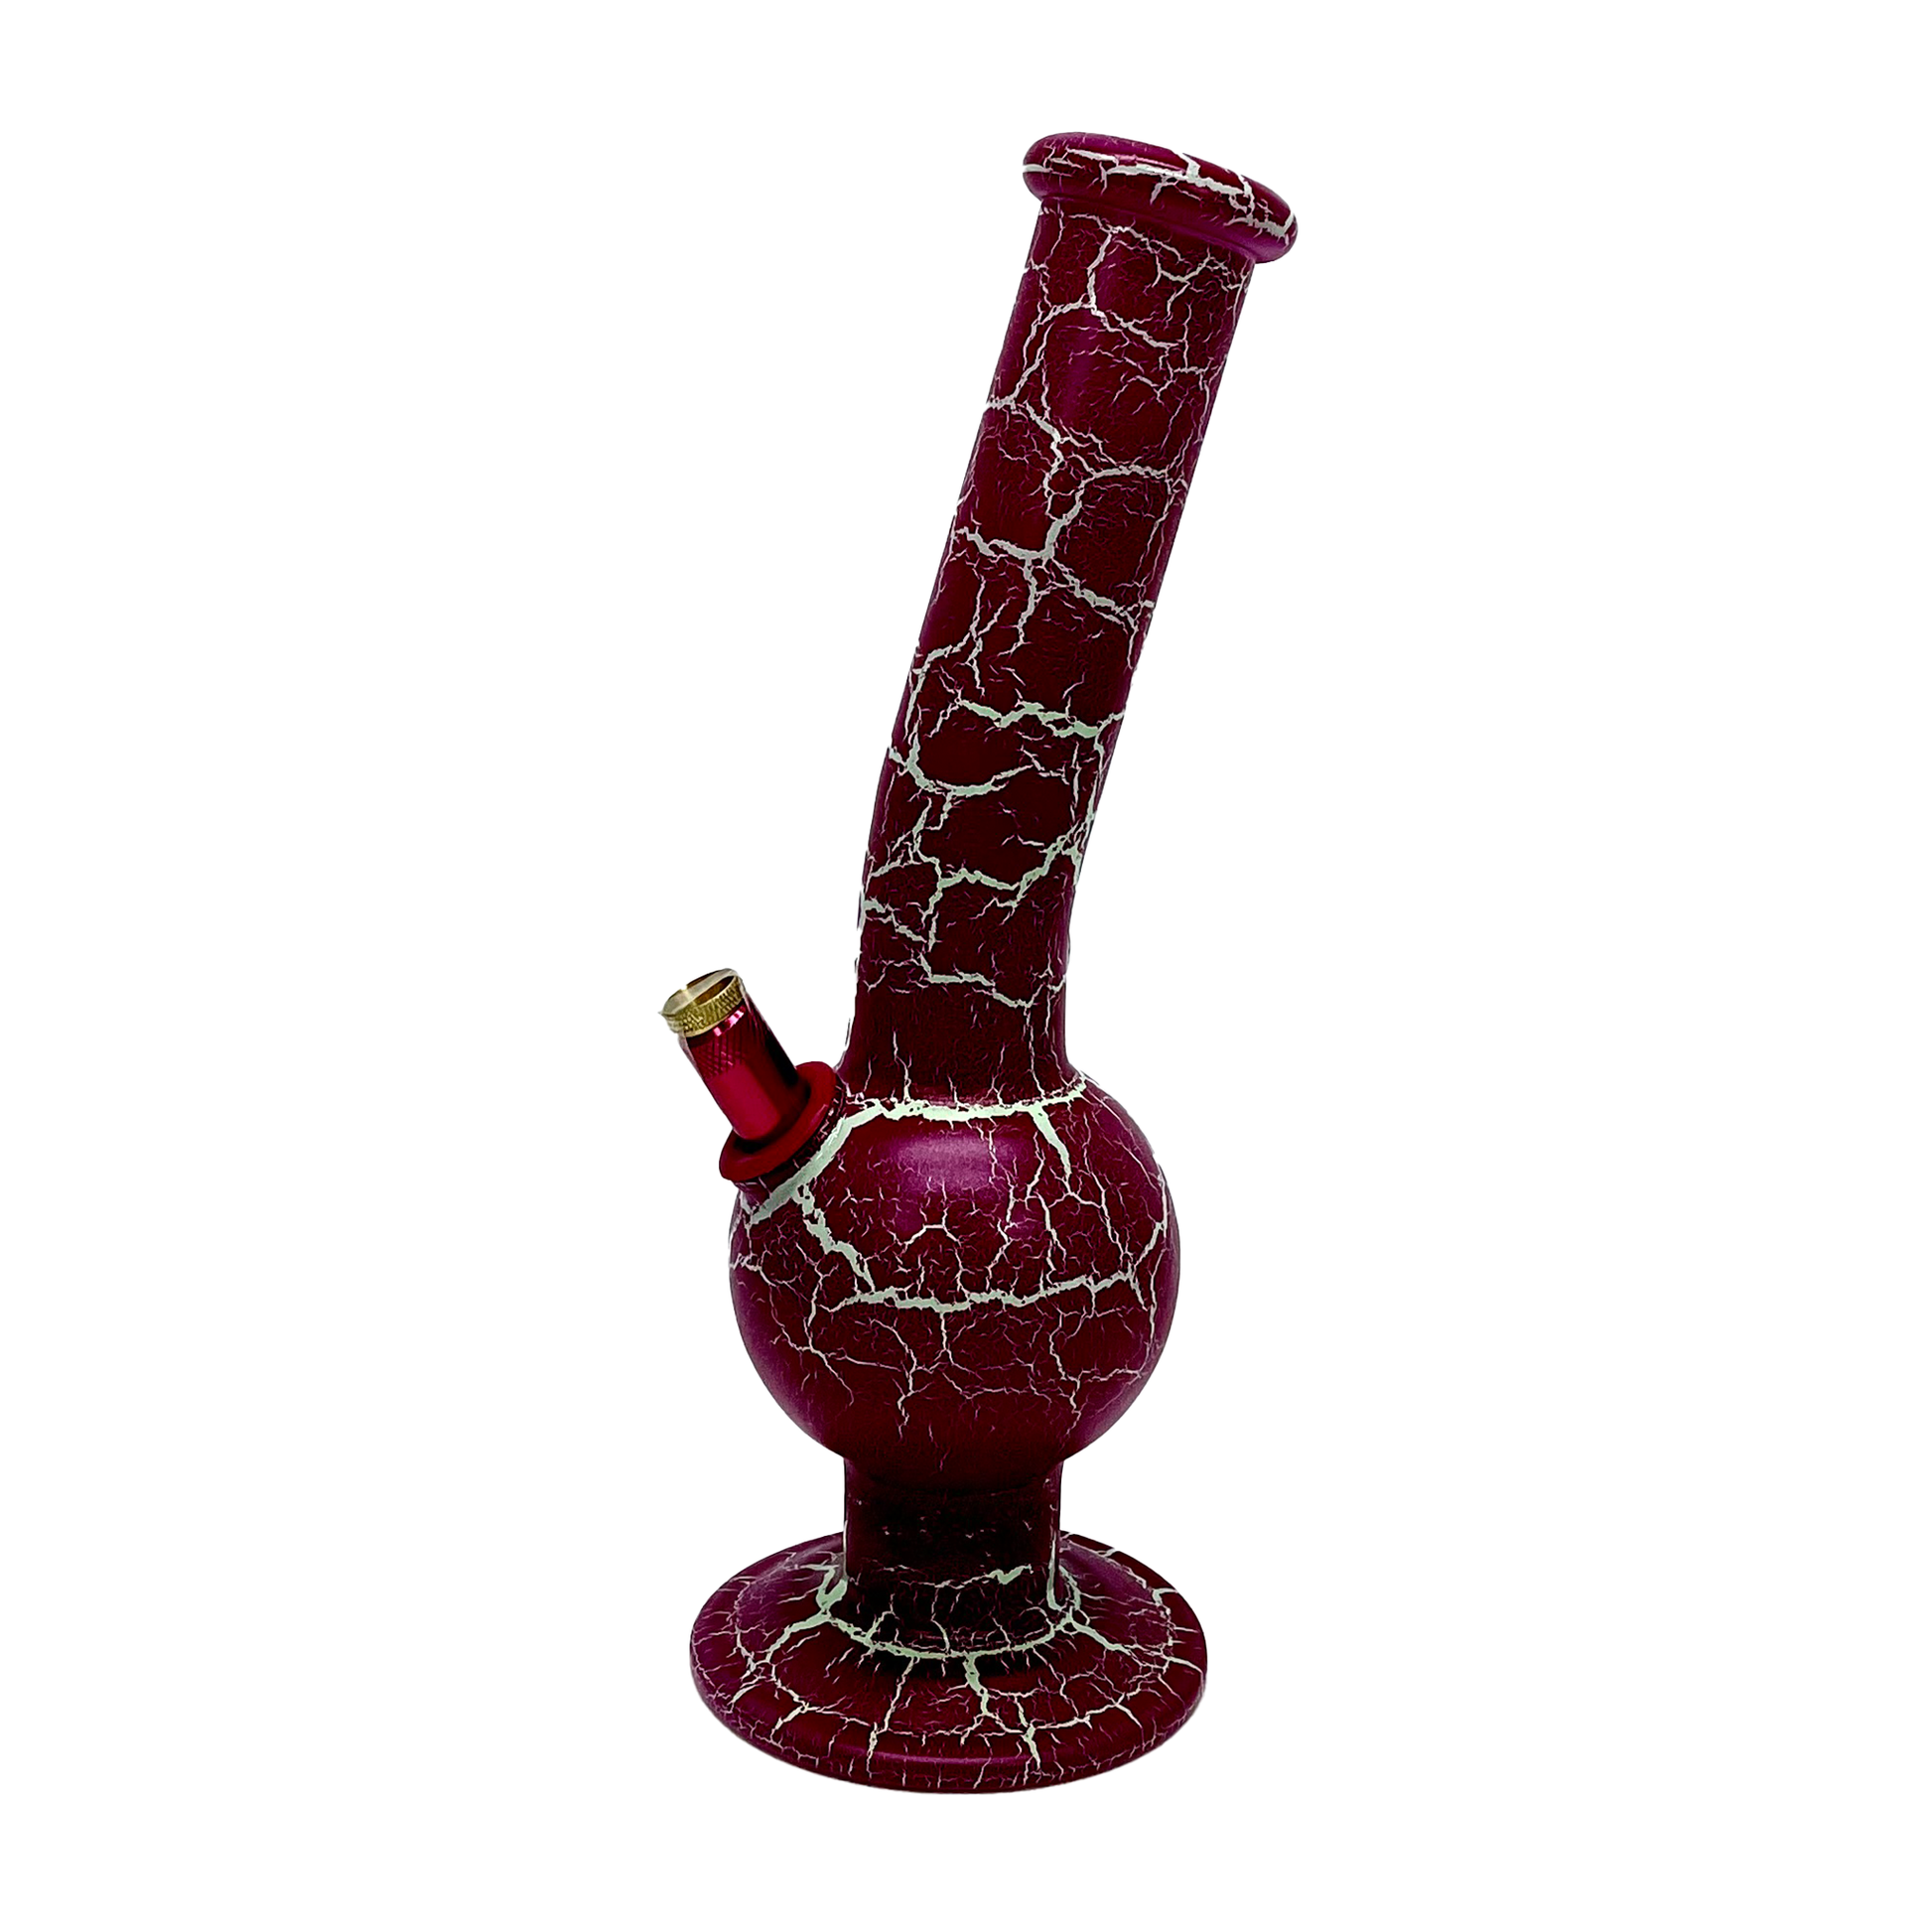 Special Edition Bongfire 38cm Large Glass Bong with Metal Stem